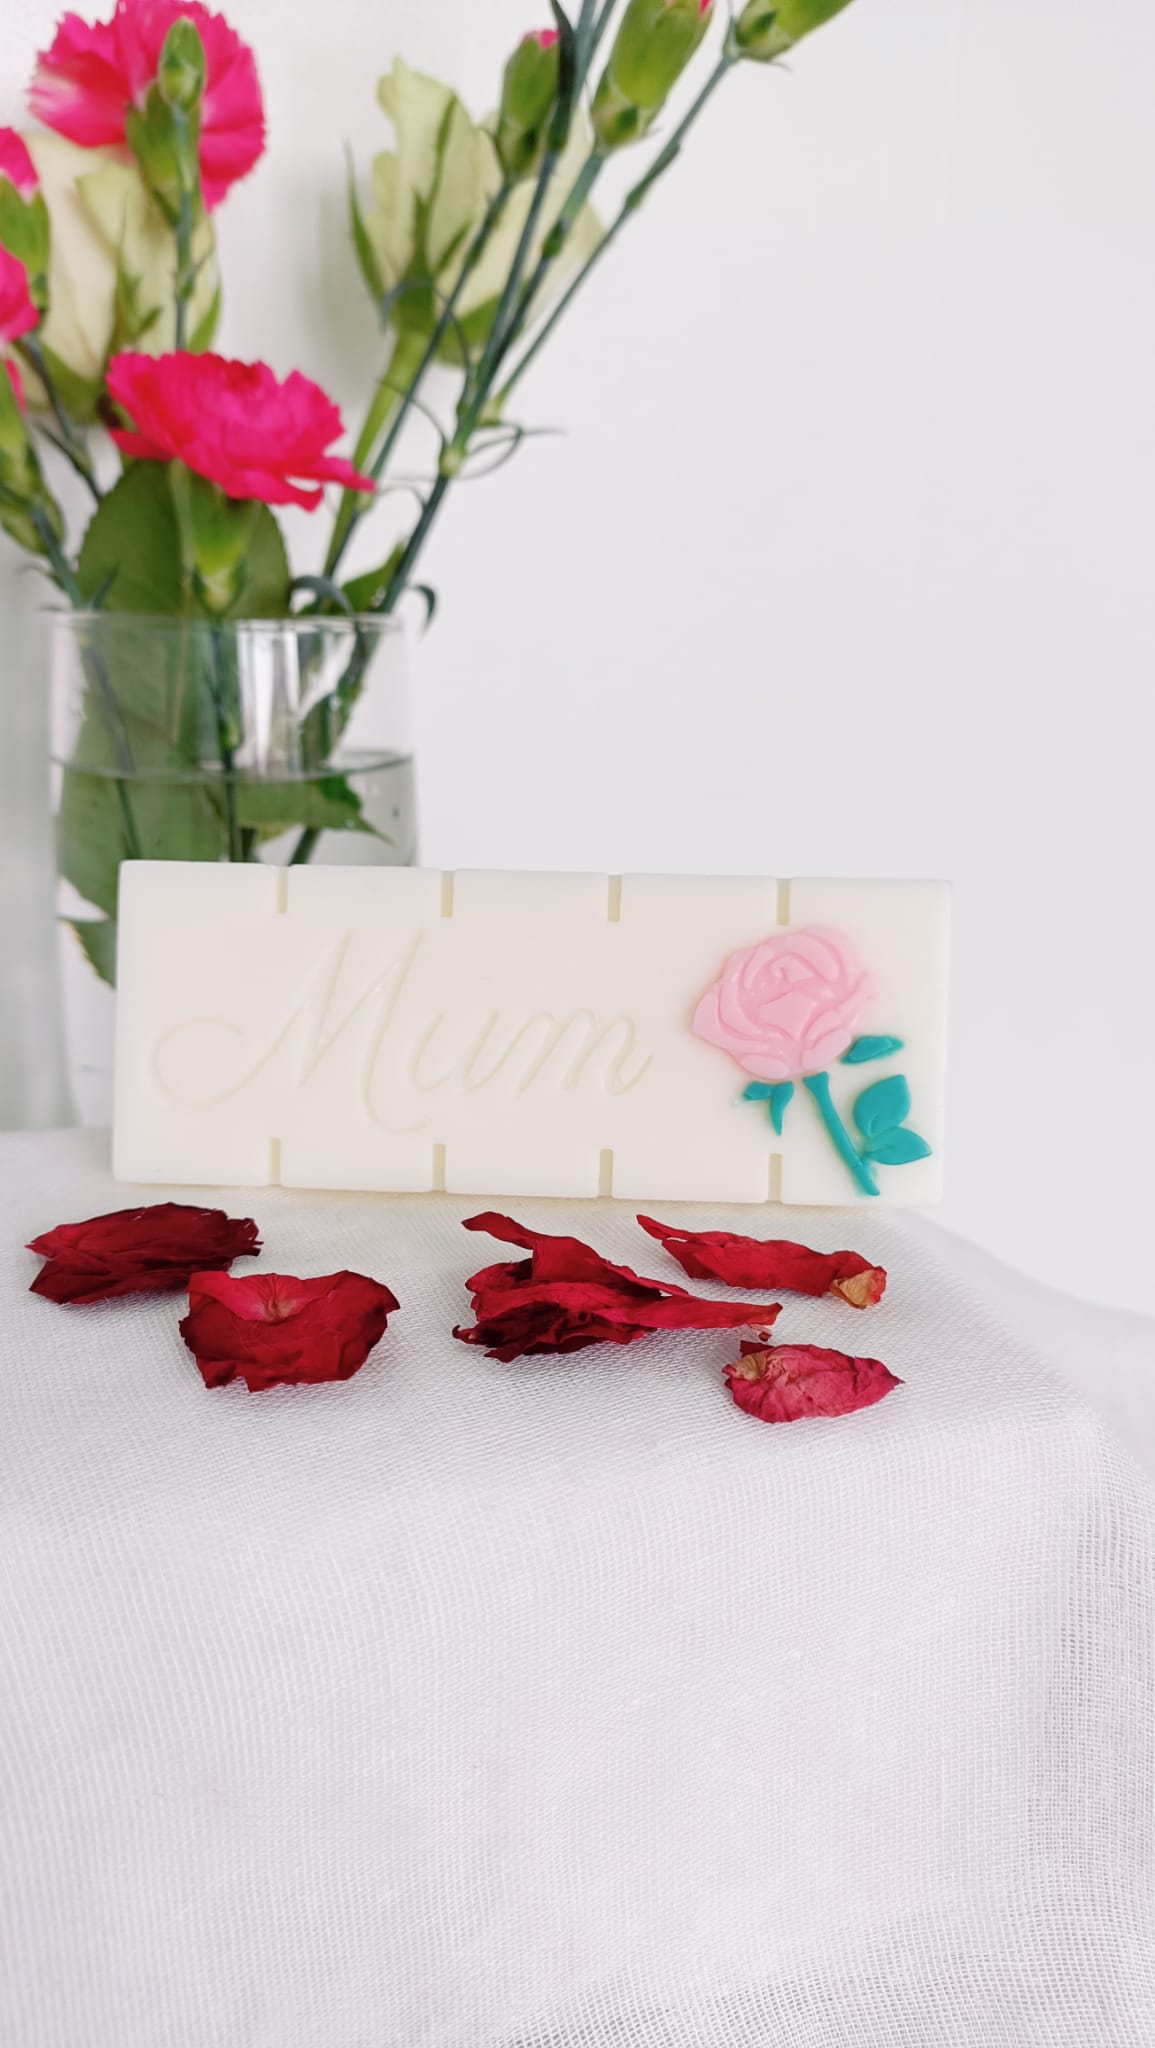 Highly Scented Mum Rose Snap Bar